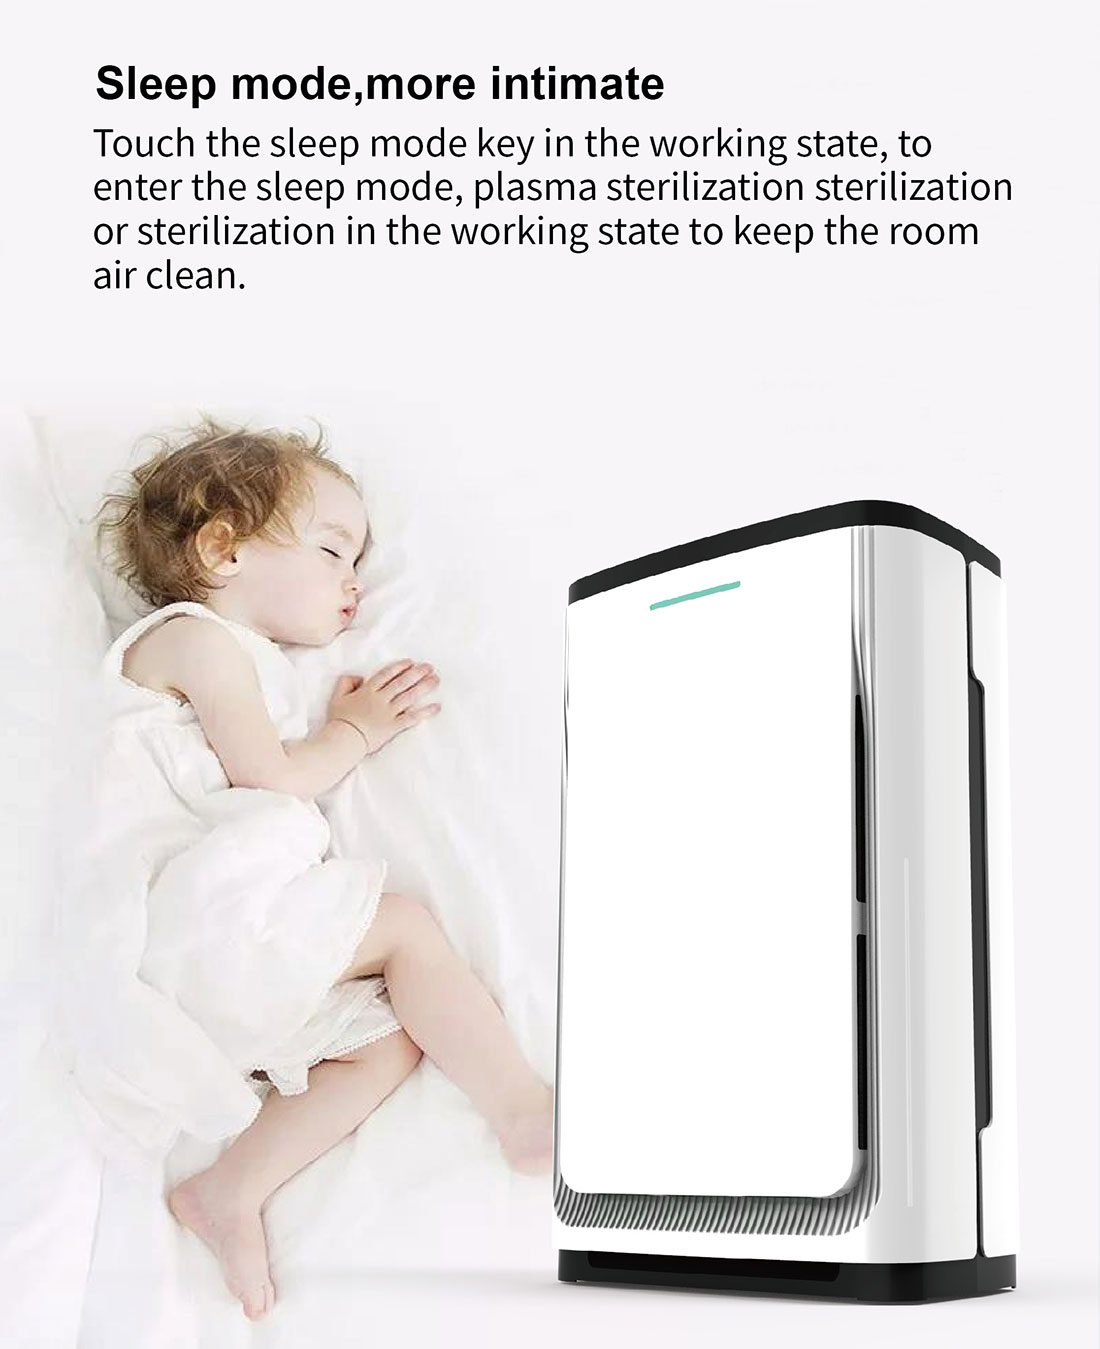 HEPA air purifier for office and bedroom